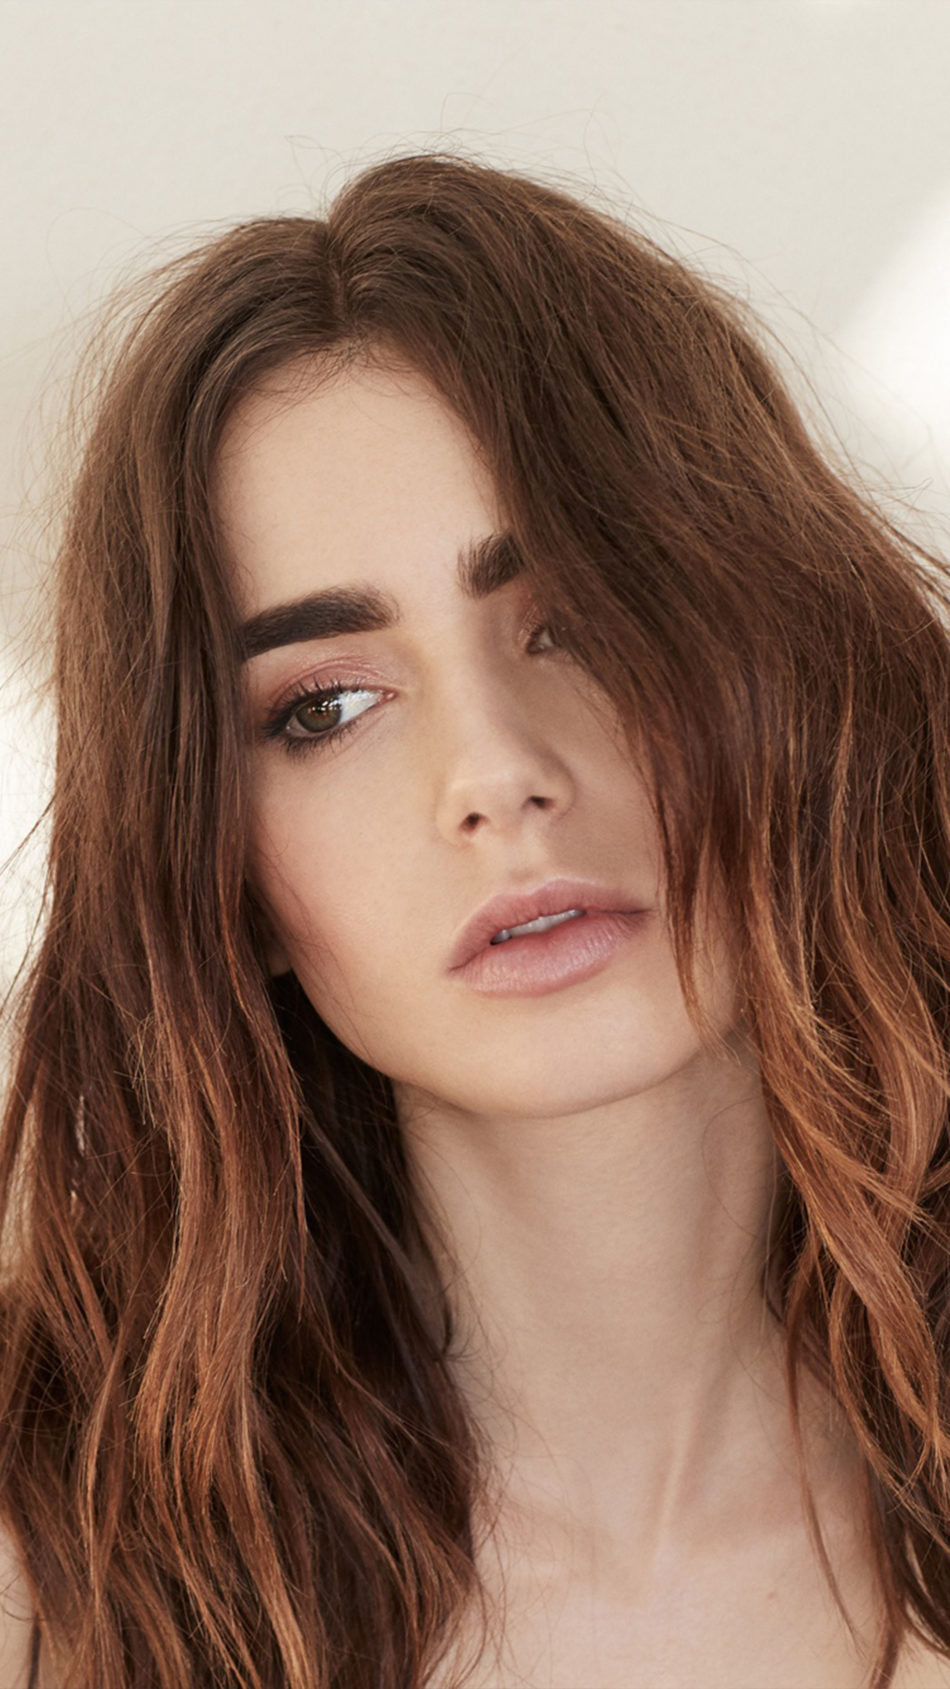 Cute Actress Lily Collins 4K Ultra HD Mobile Wallpaper